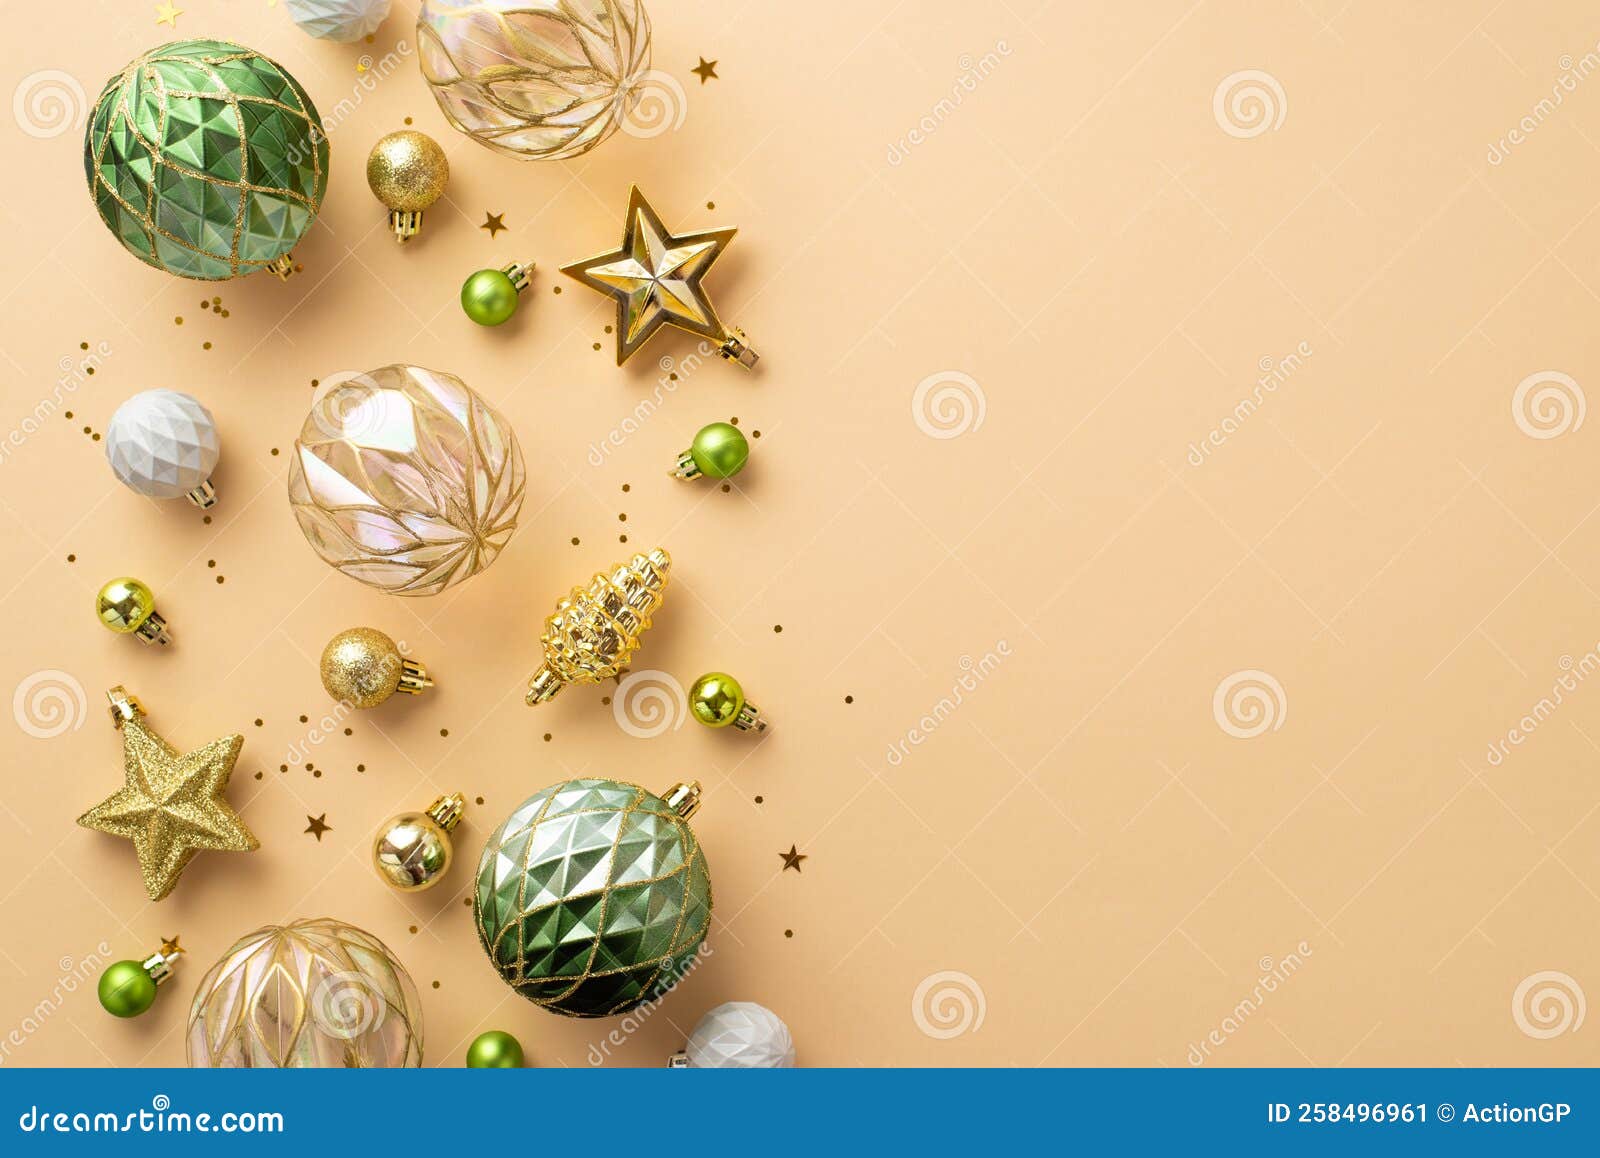 Background Christmas Clipart Transparent Stock Illustrations – 1,568  Background Christmas Clipart Transparent Stock Illustrations, Vectors &  Clipart - Dreamstime